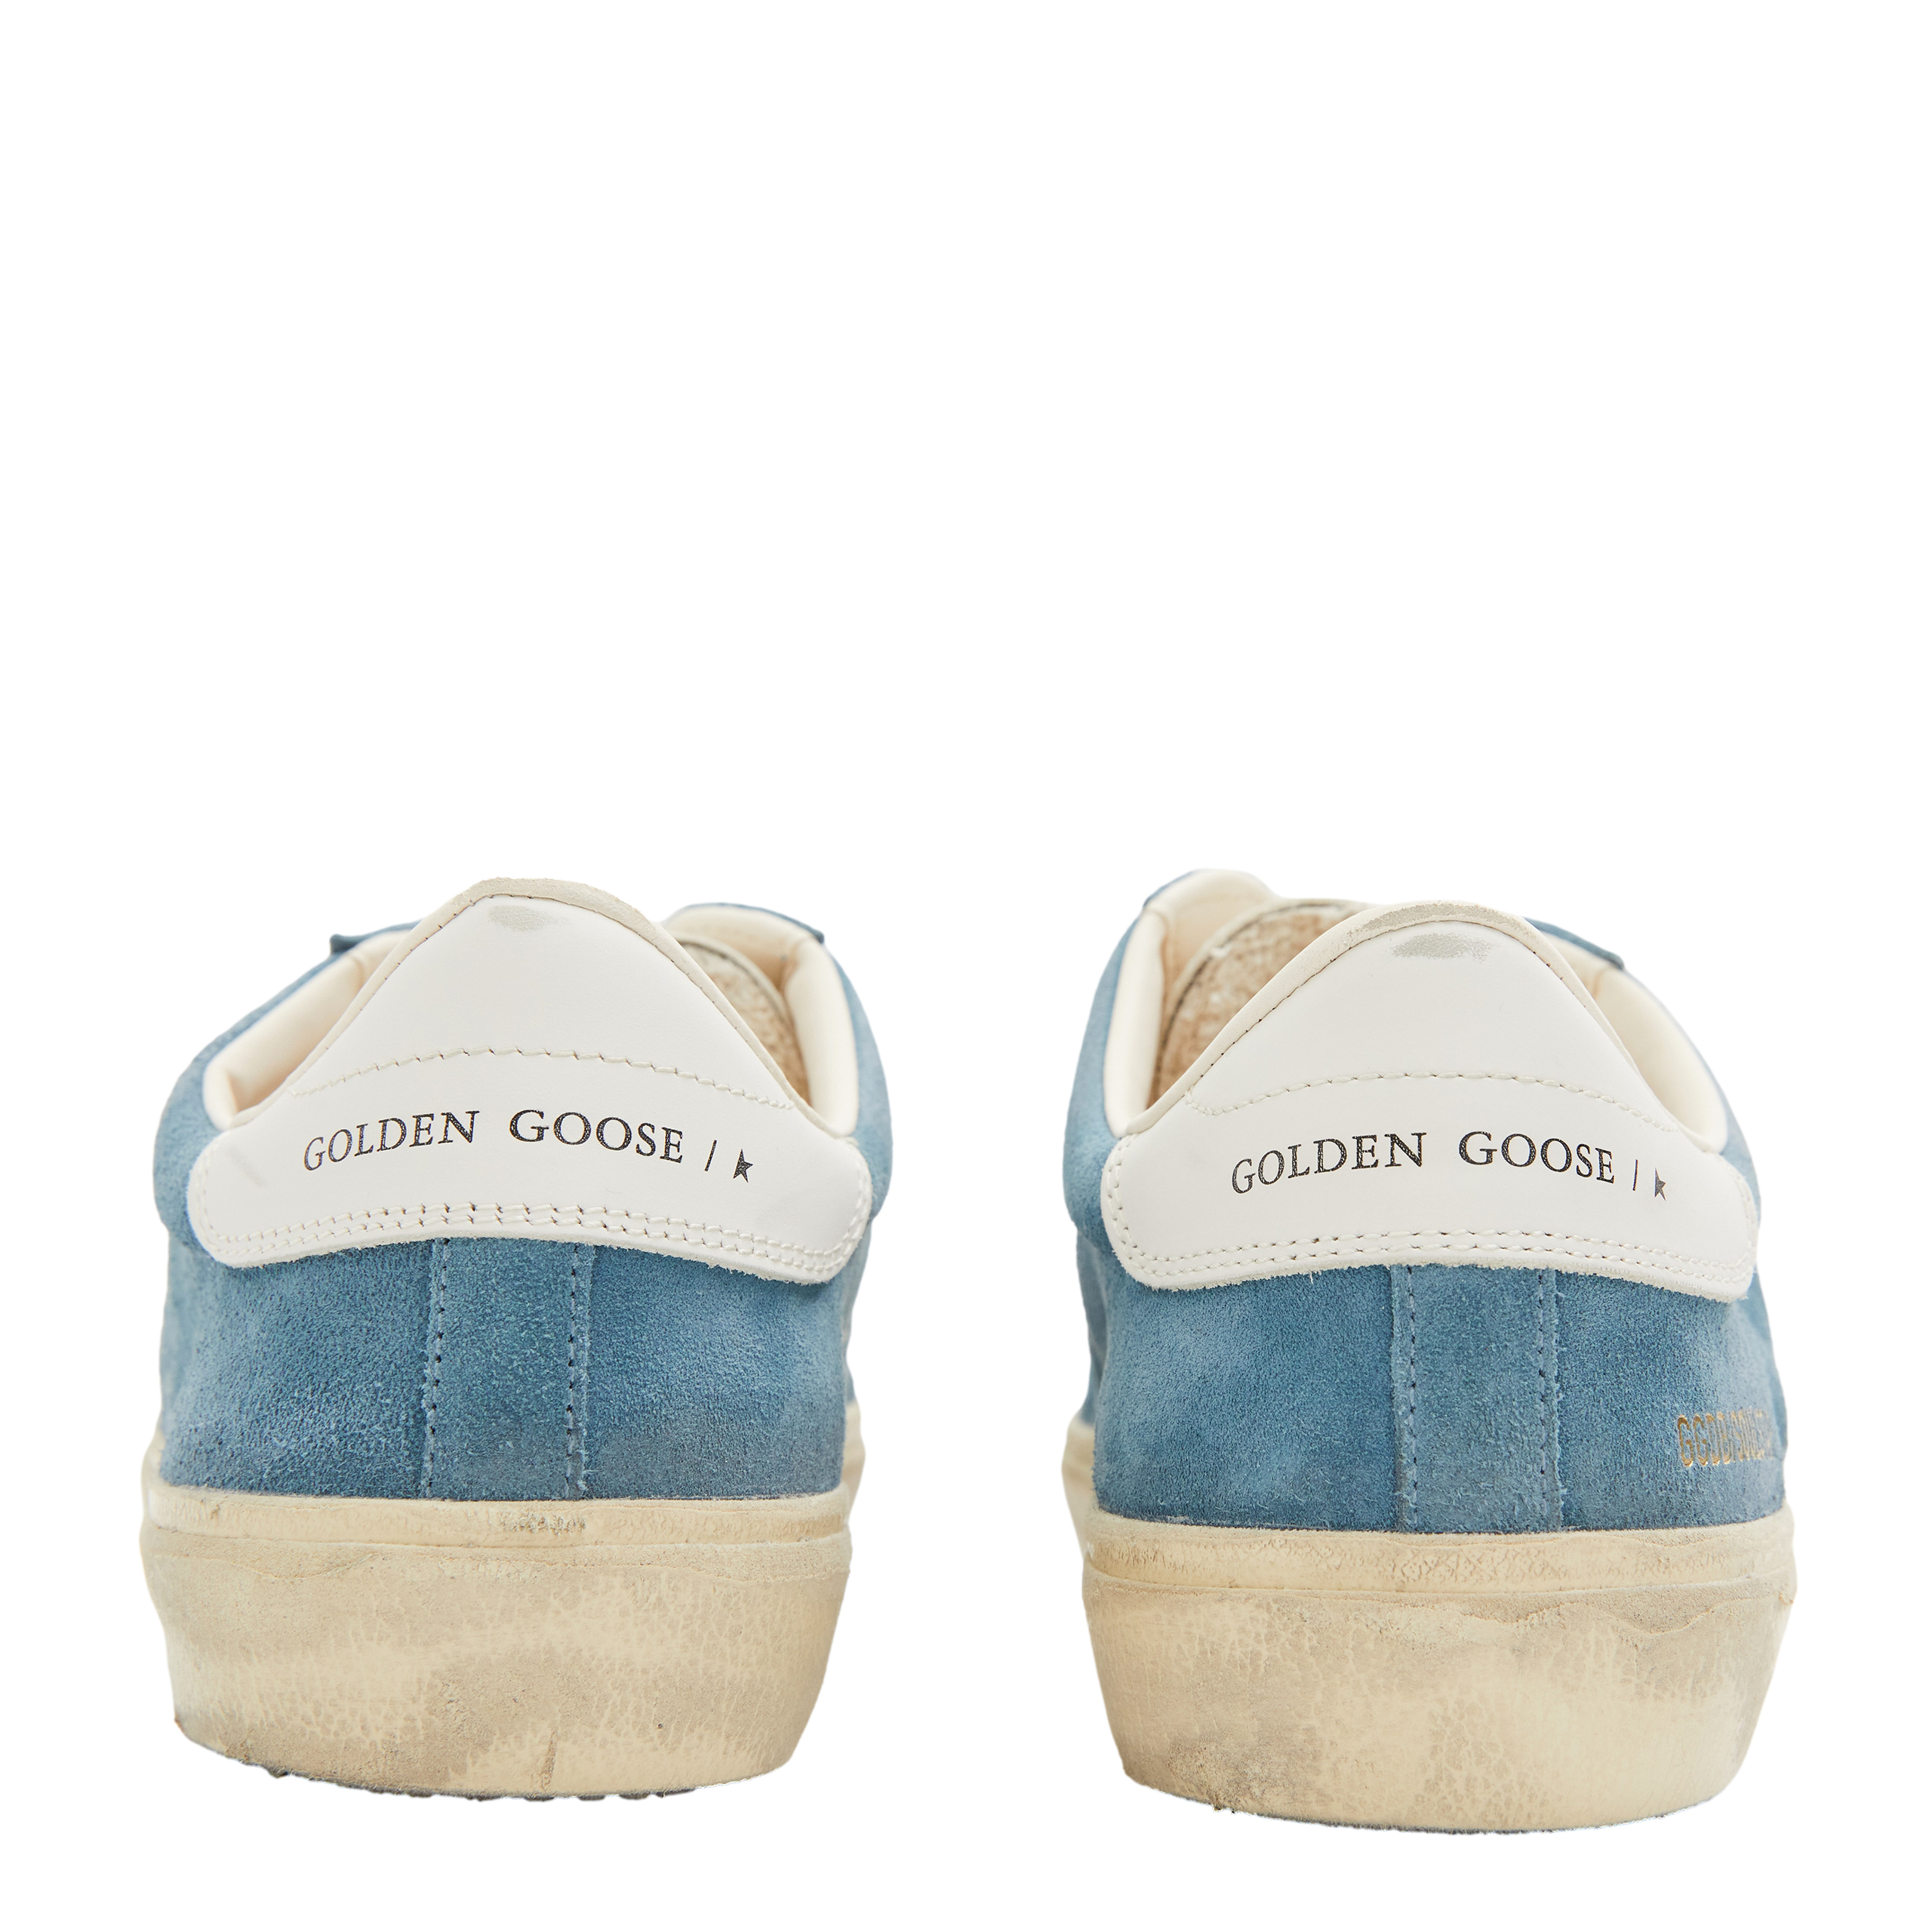 None Golden Goose Deluxe Brand GMF00464/F005047/50810, размер 39;40;41;42;43;44;45;46 GMF00464/F005047/50810 - фото 4